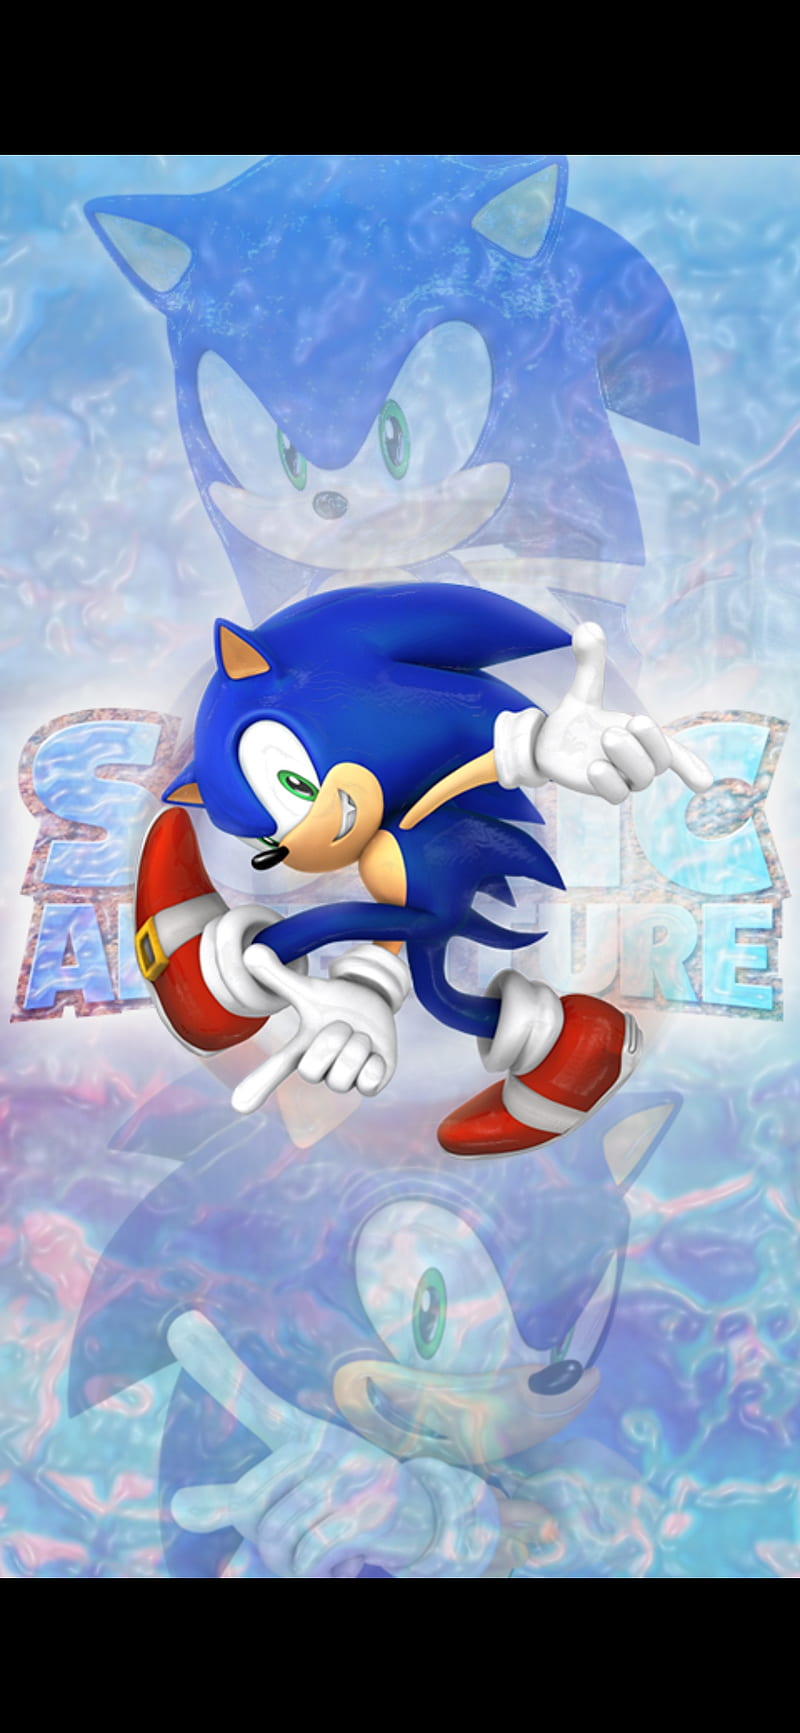 Download Sonic Adventure wallpapers for mobile phone free Sonic  Adventure HD pictures